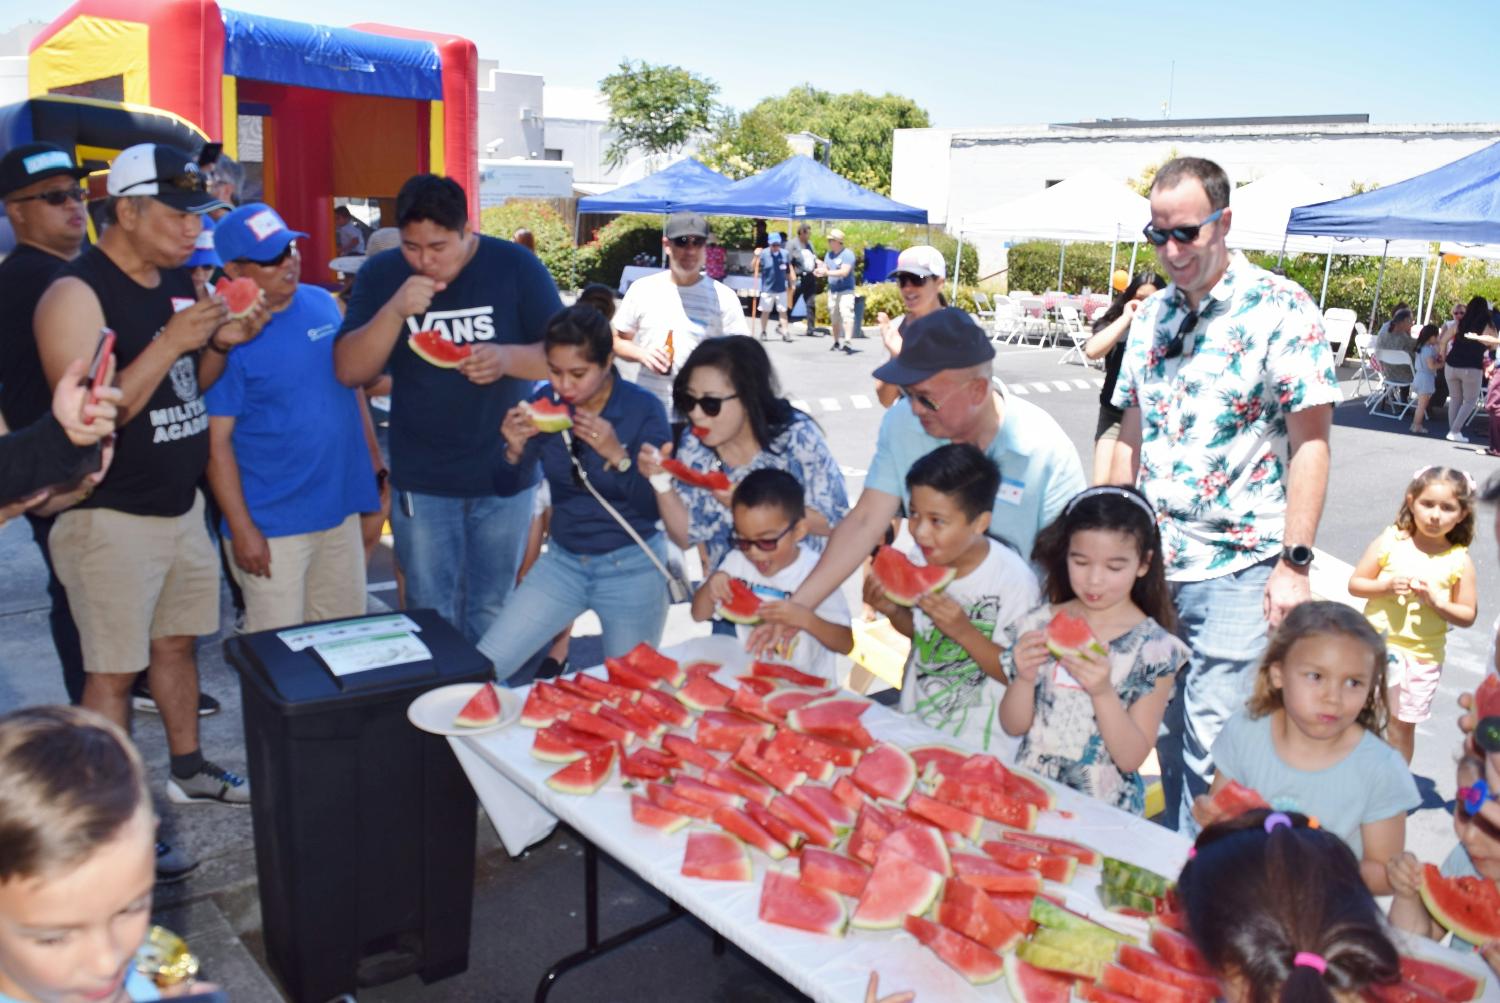 Spring Family Carnival - Watermelon eating contest 